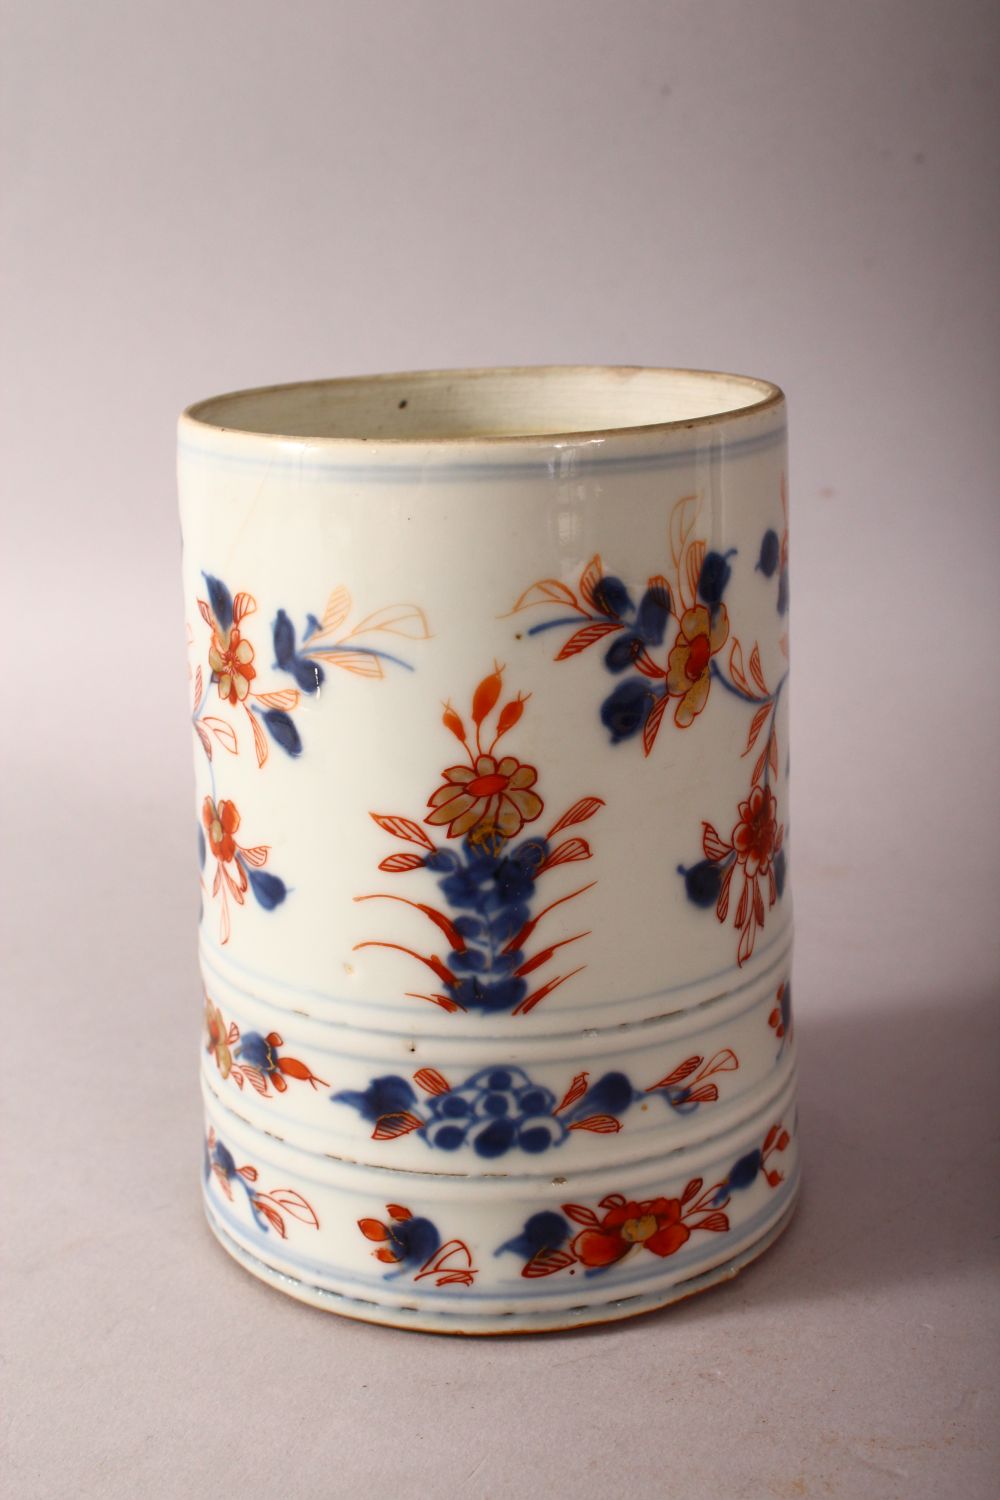 AN 18TH CENTURY CHINESE IMARI PORCELAIN TANKARD - decorated with underglaze blue and orange floral - Image 2 of 5